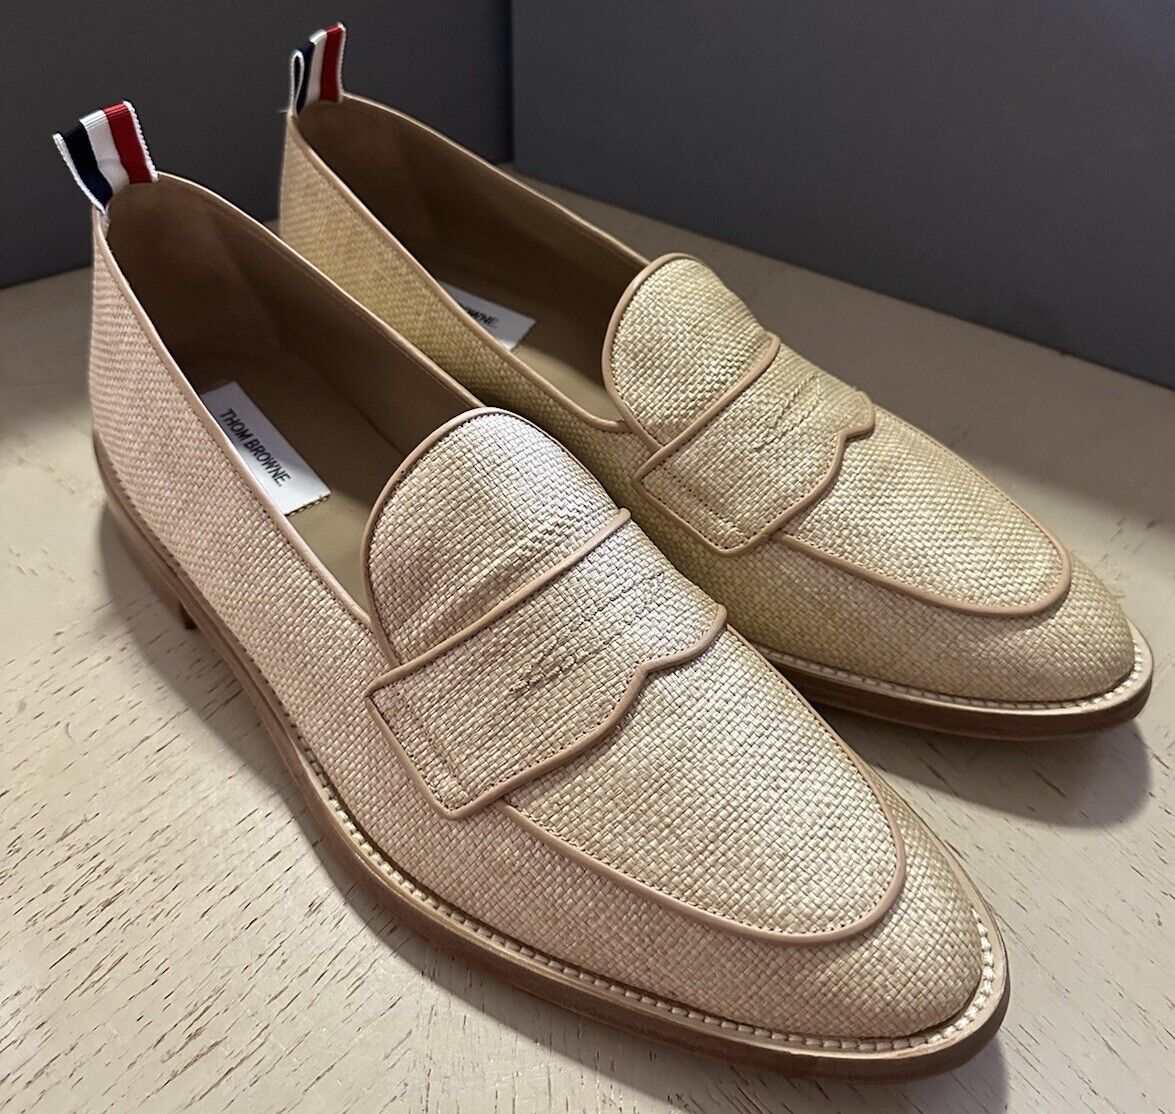 NIB $850 Thom Browne Men Textured Penny Loafers Shoes Natural 10 US/43 EU Italy